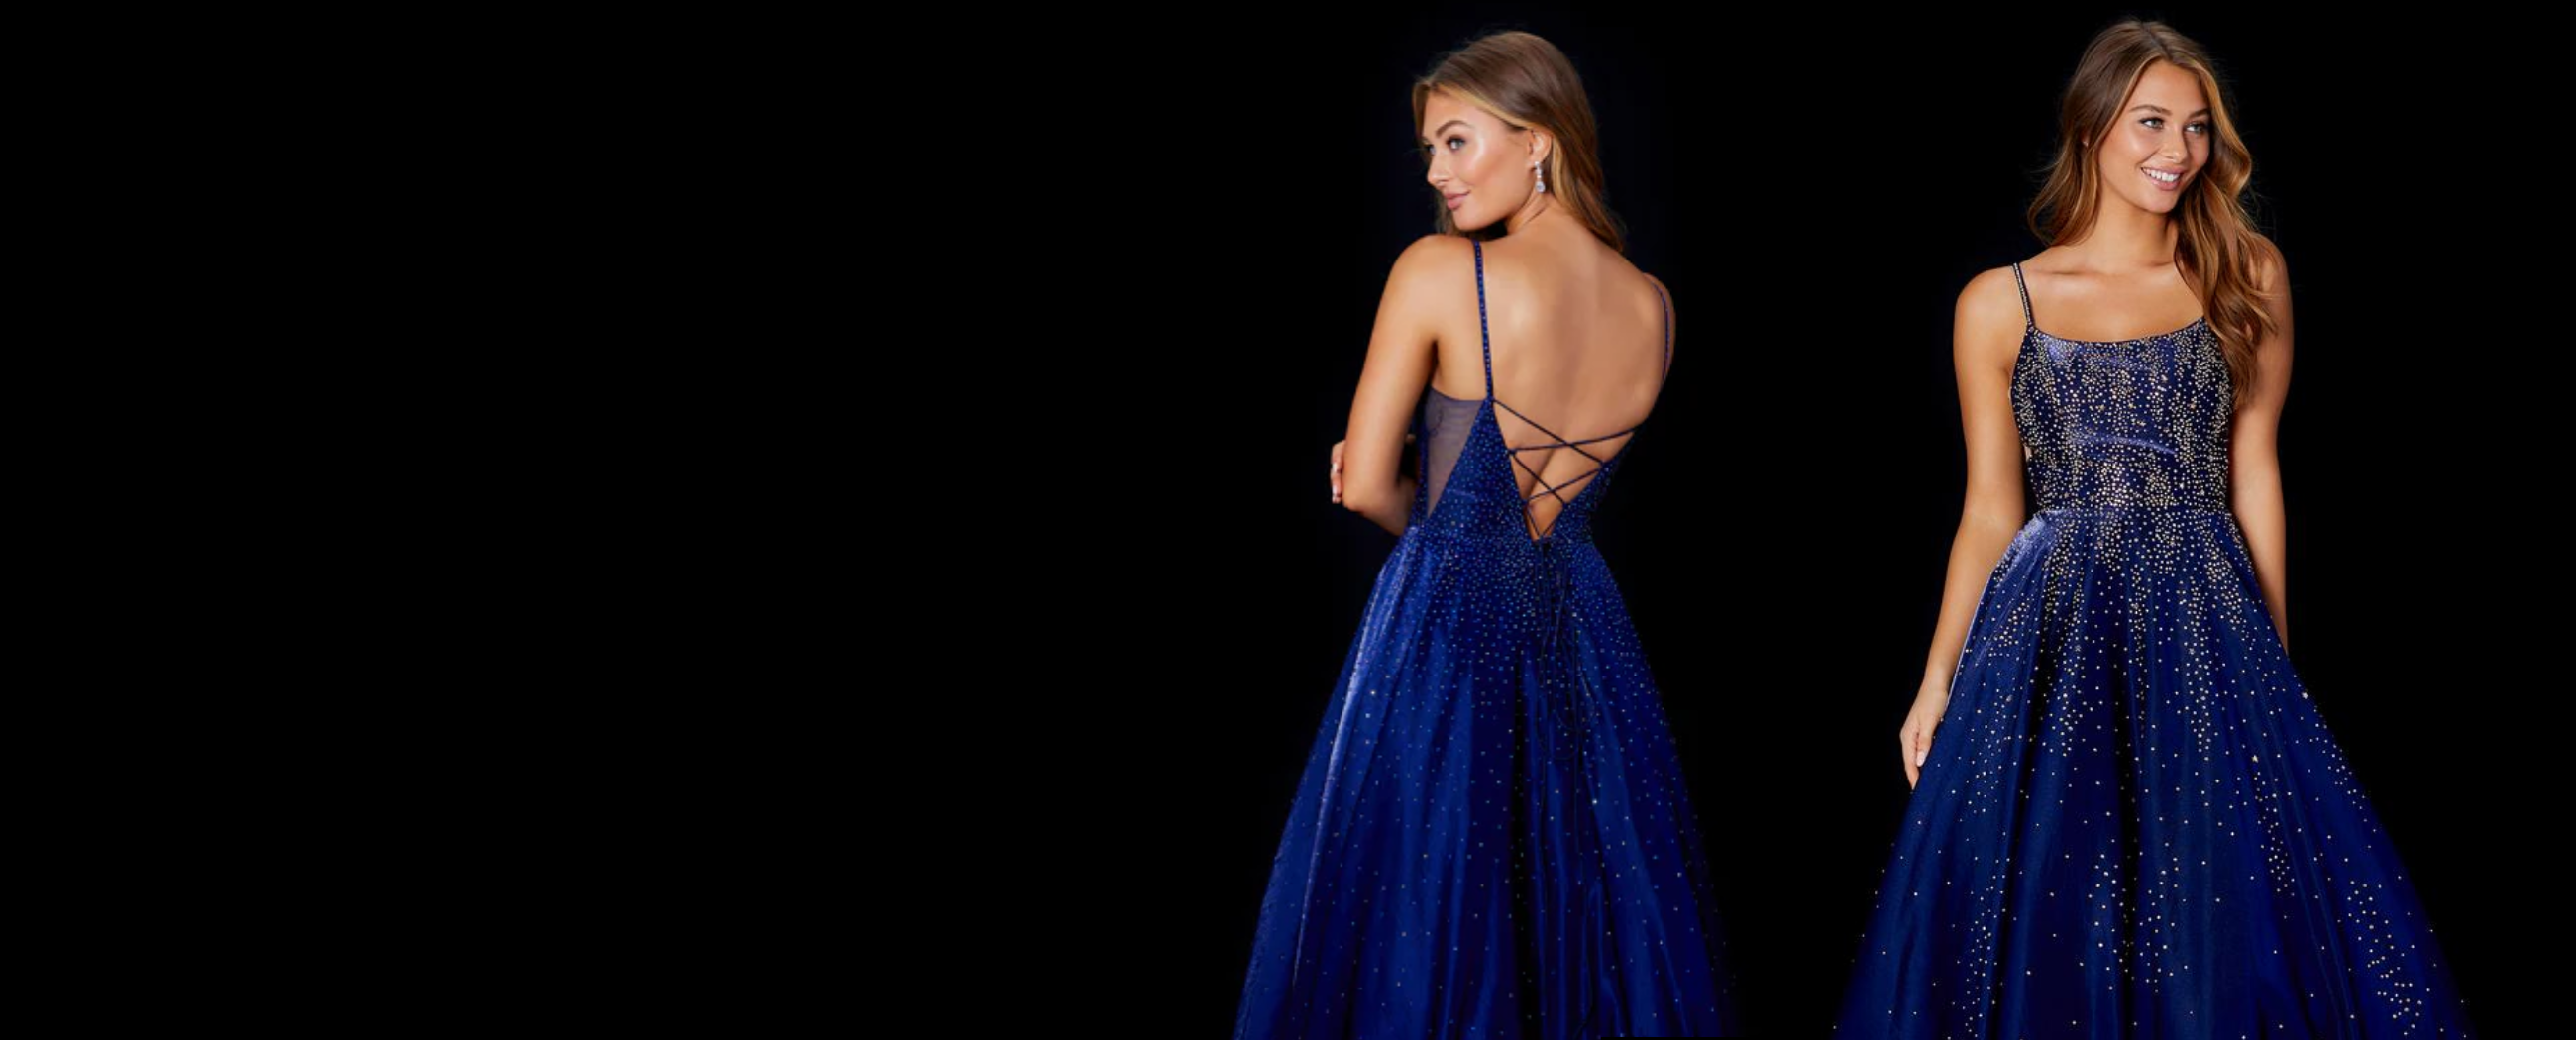 Featuring Stunning Gowns By